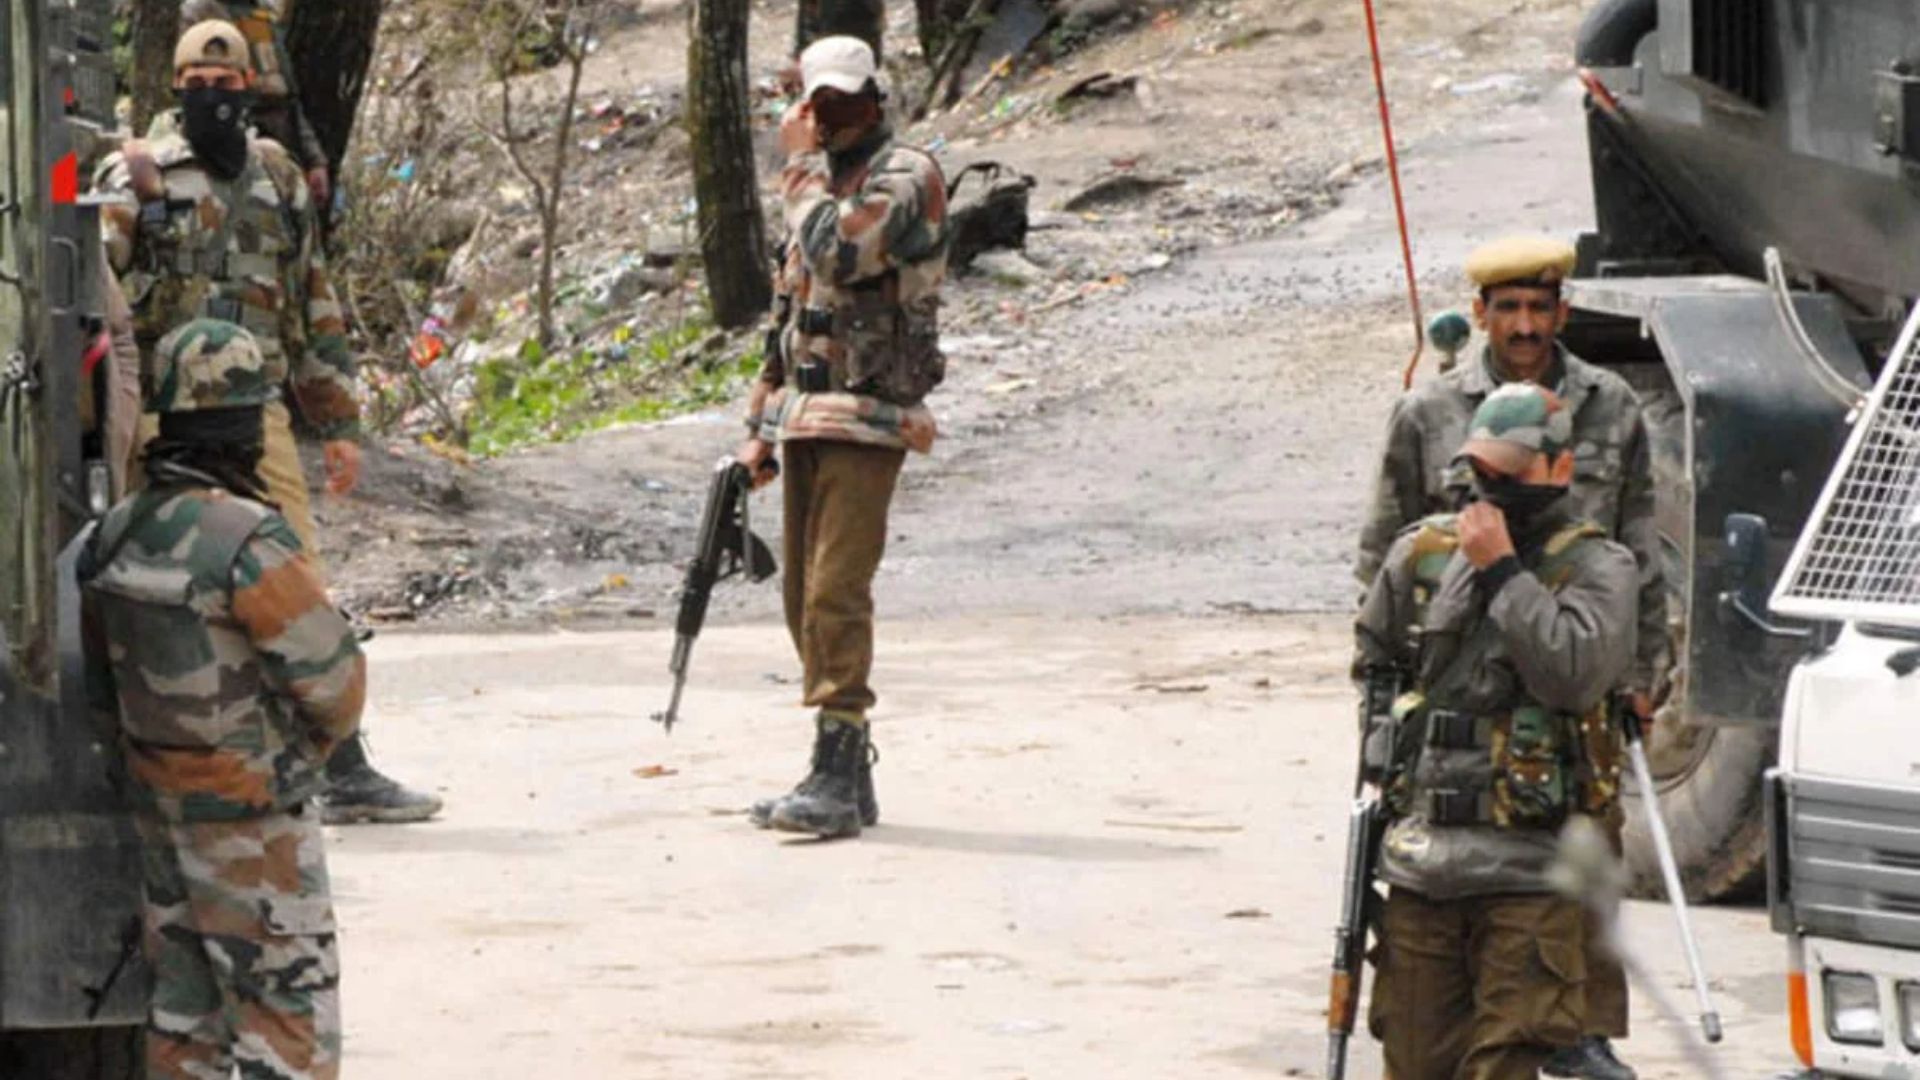 Security forces open fire on suspicious persons in Rajouri